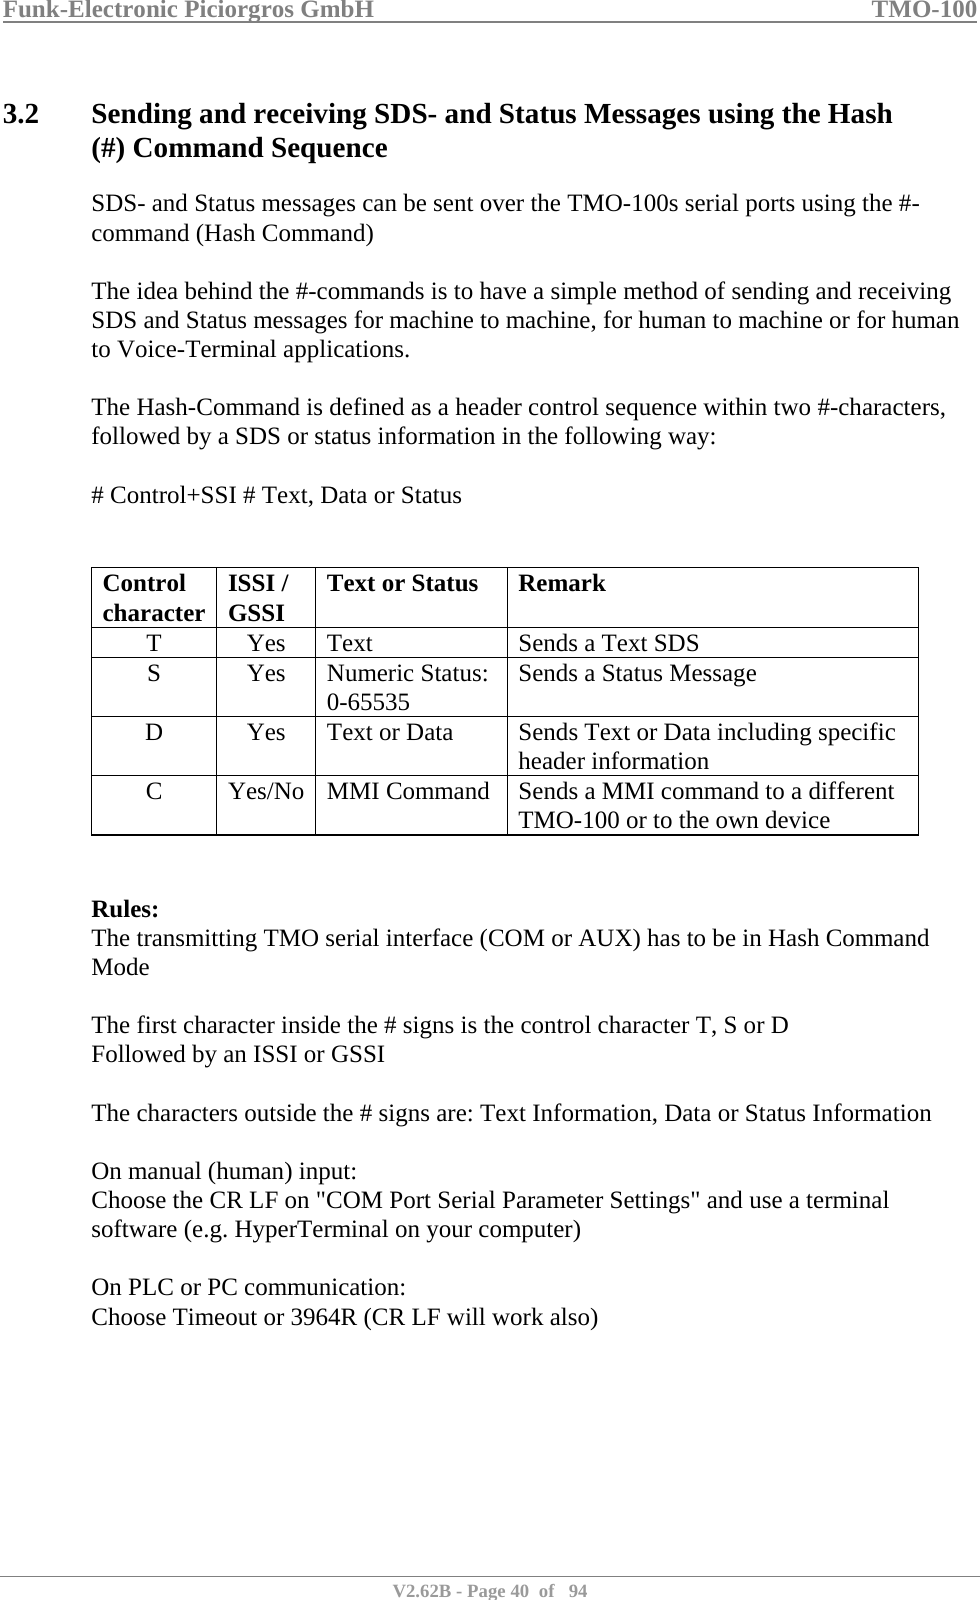 Funk-Electronic Piciorgros GmbH   TMO-100   V2.62B - Page 40  of   94   3.2 Sending and receiving SDS- and Status Messages using the Hash (#) Command Sequence SDS- and Status messages can be sent over the TMO-100s serial ports using the #-command (Hash Command)  The idea behind the #-commands is to have a simple method of sending and receiving SDS and Status messages for machine to machine, for human to machine or for human to Voice-Terminal applications.  The Hash-Command is defined as a header control sequence within two #-characters, followed by a SDS or status information in the following way:  # Control+SSI # Text, Data or Status   Control  character  ISSI / GSSI  Text or Status  Remark T  Yes  Text  Sends a Text SDS S Yes Numeric Status: 0-65535  Sends a Status Message D  Yes  Text or Data  Sends Text or Data including specific header information C  Yes/No  MMI Command  Sends a MMI command to a different TMO-100 or to the own device   Rules: The transmitting TMO serial interface (COM or AUX) has to be in Hash Command Mode  The first character inside the # signs is the control character T, S or D Followed by an ISSI or GSSI  The characters outside the # signs are: Text Information, Data or Status Information  On manual (human) input:  Choose the CR LF on &quot;COM Port Serial Parameter Settings&quot; and use a terminal software (e.g. HyperTerminal on your computer)  On PLC or PC communication:  Choose Timeout or 3964R (CR LF will work also)  